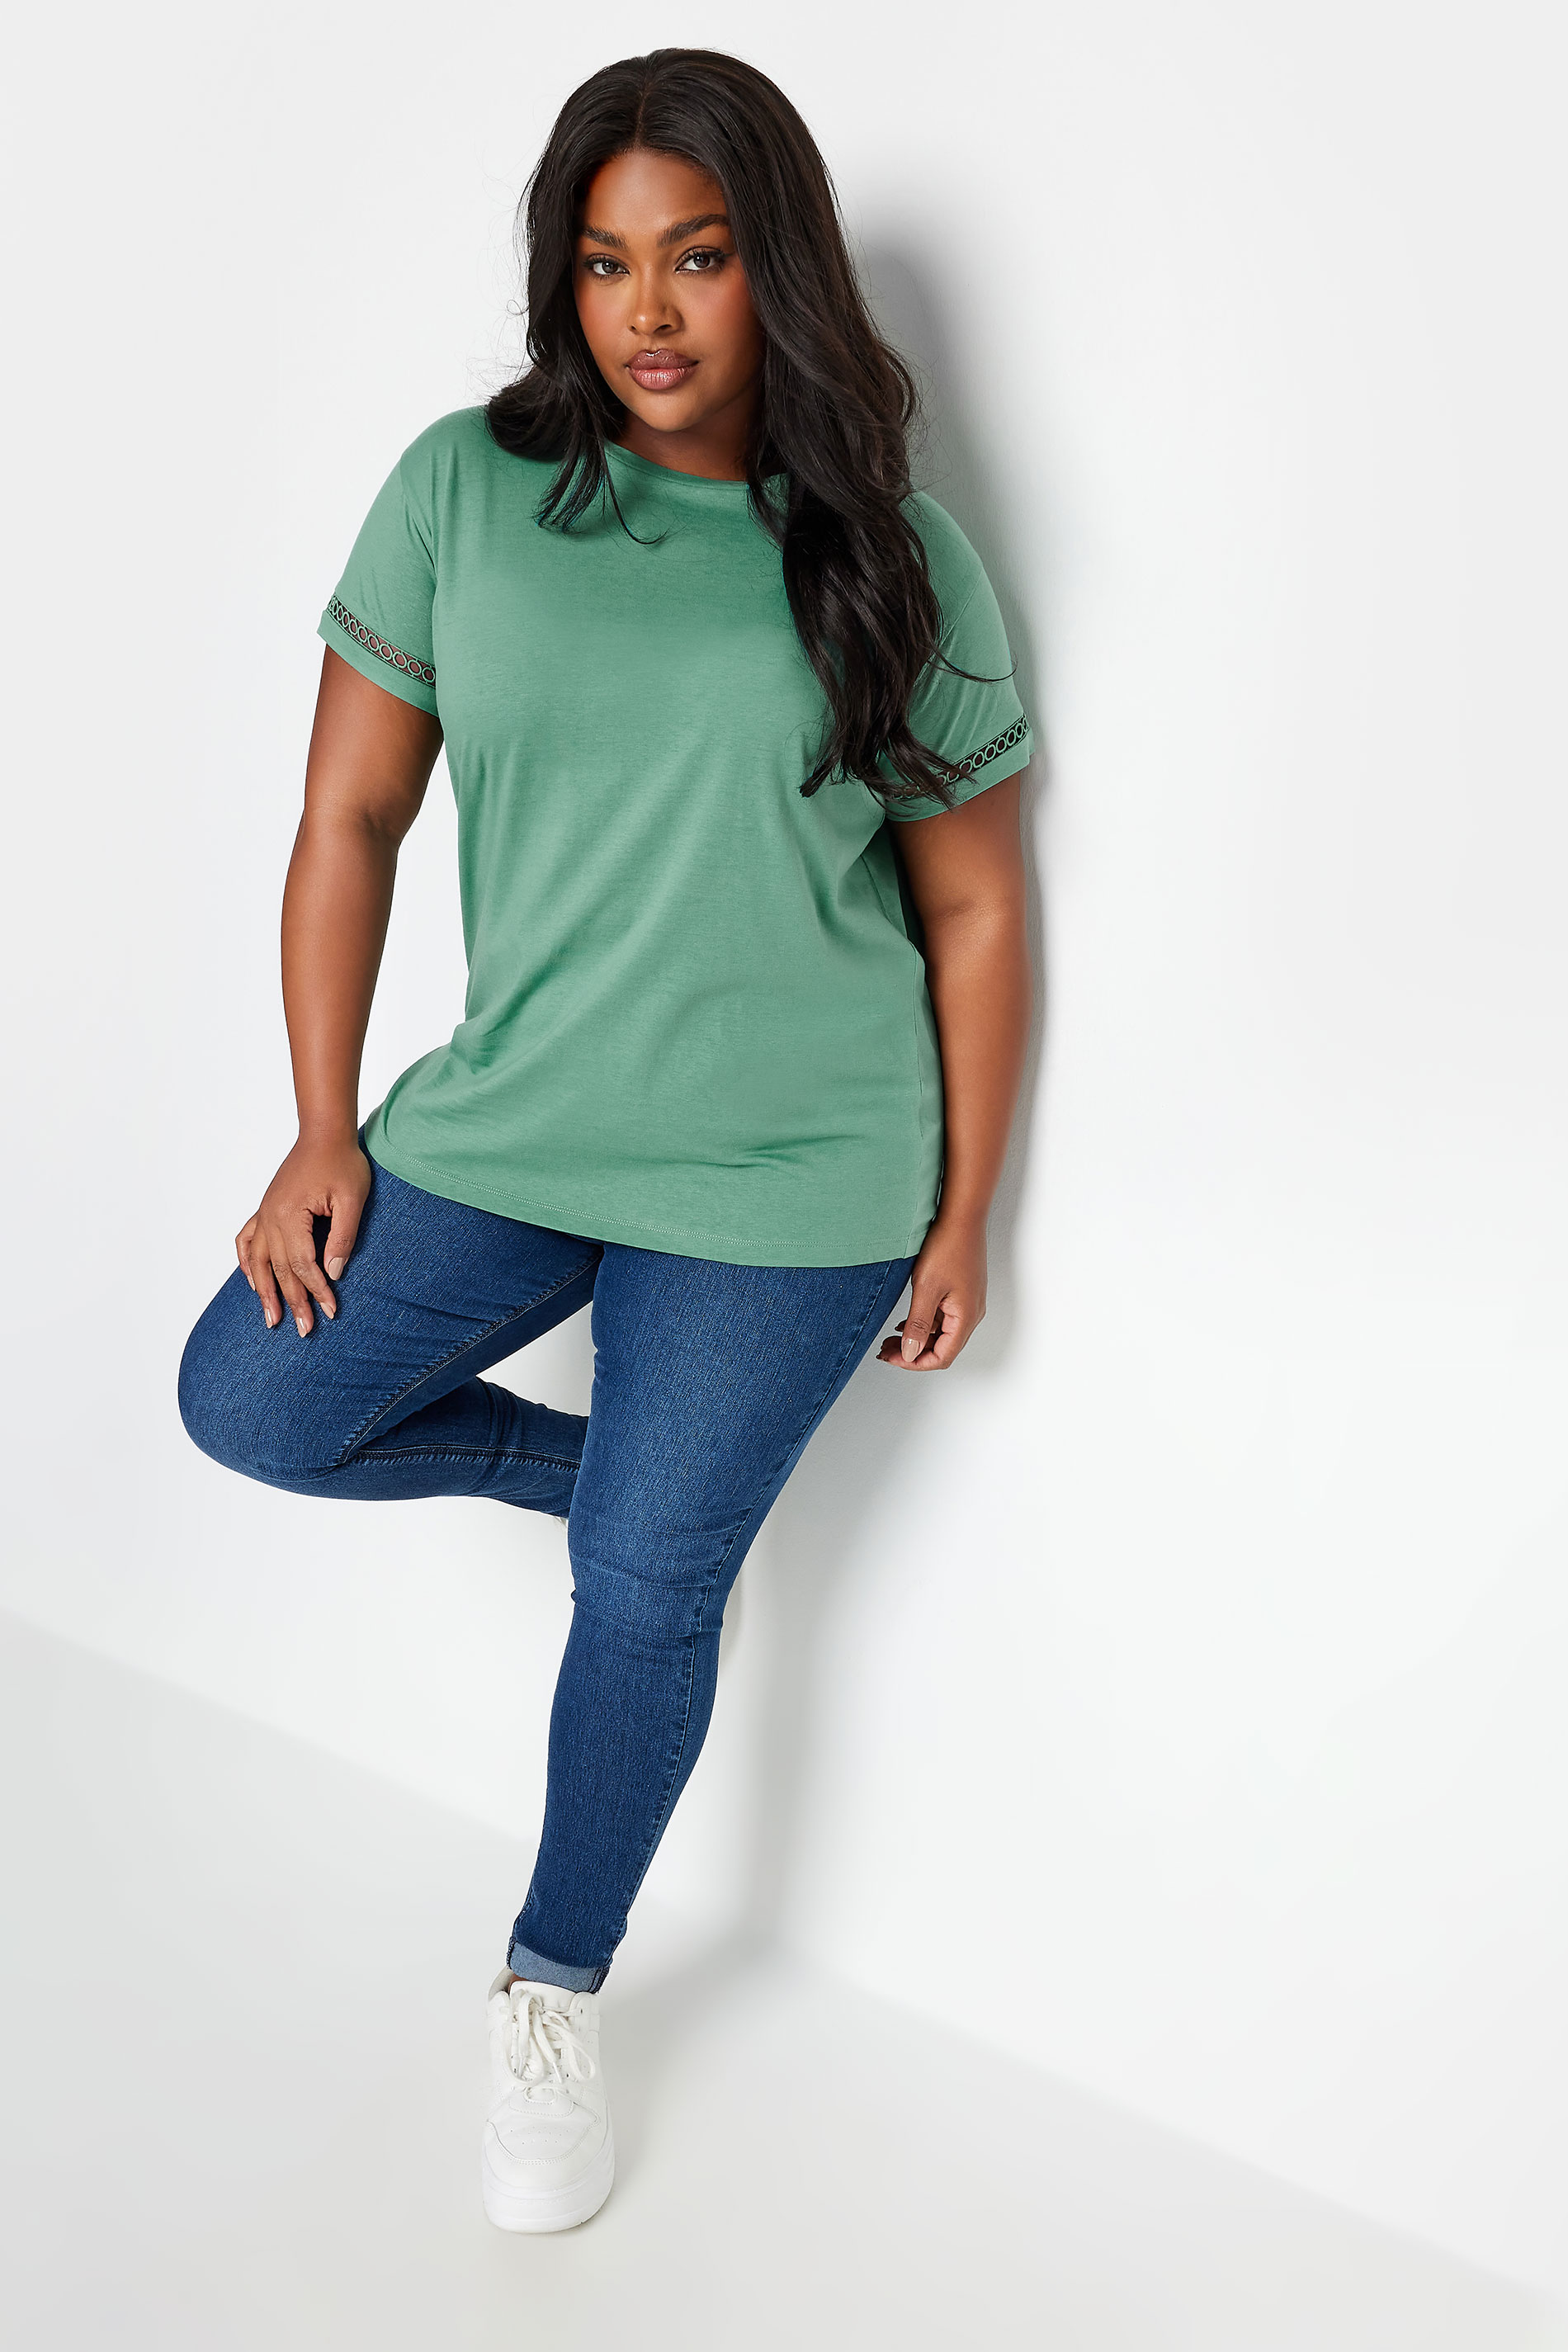 LIMITED COLLECTION Plus Size Green Crochet Trim Short Sleeve T-Shirt | Yours Clothing 2